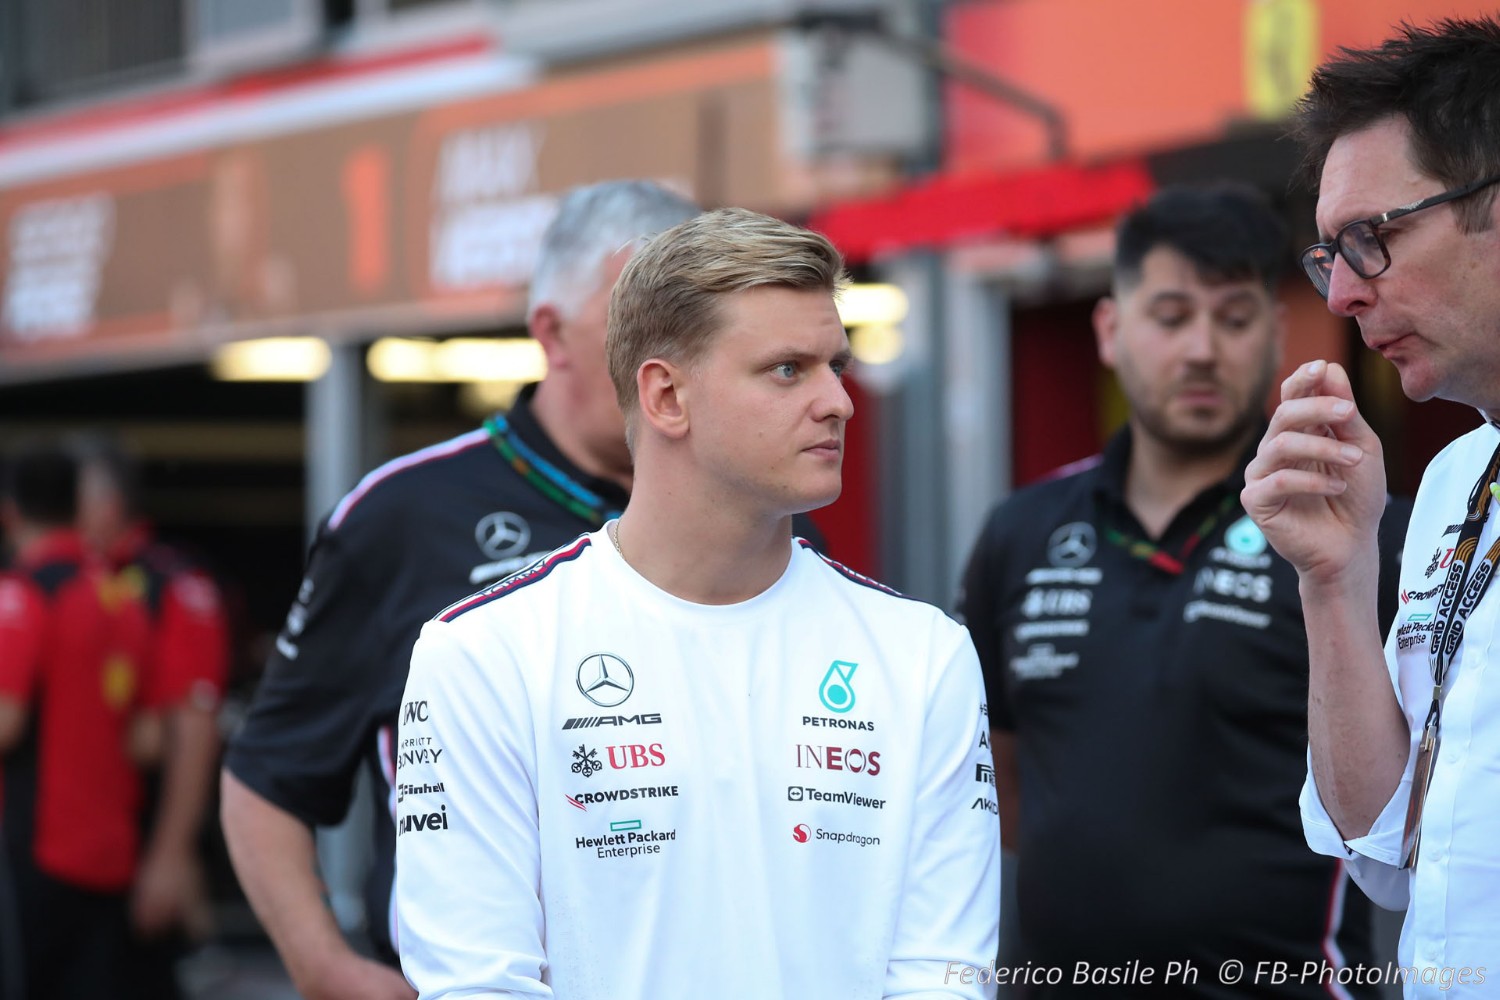 Mick Schumacher (GER), Mercedes AMG test driver, former driver at Haas F1 Team, during the Monaco GP, 25-28 May 2023 at Montecarlo, Formula 1 World championship 2023.